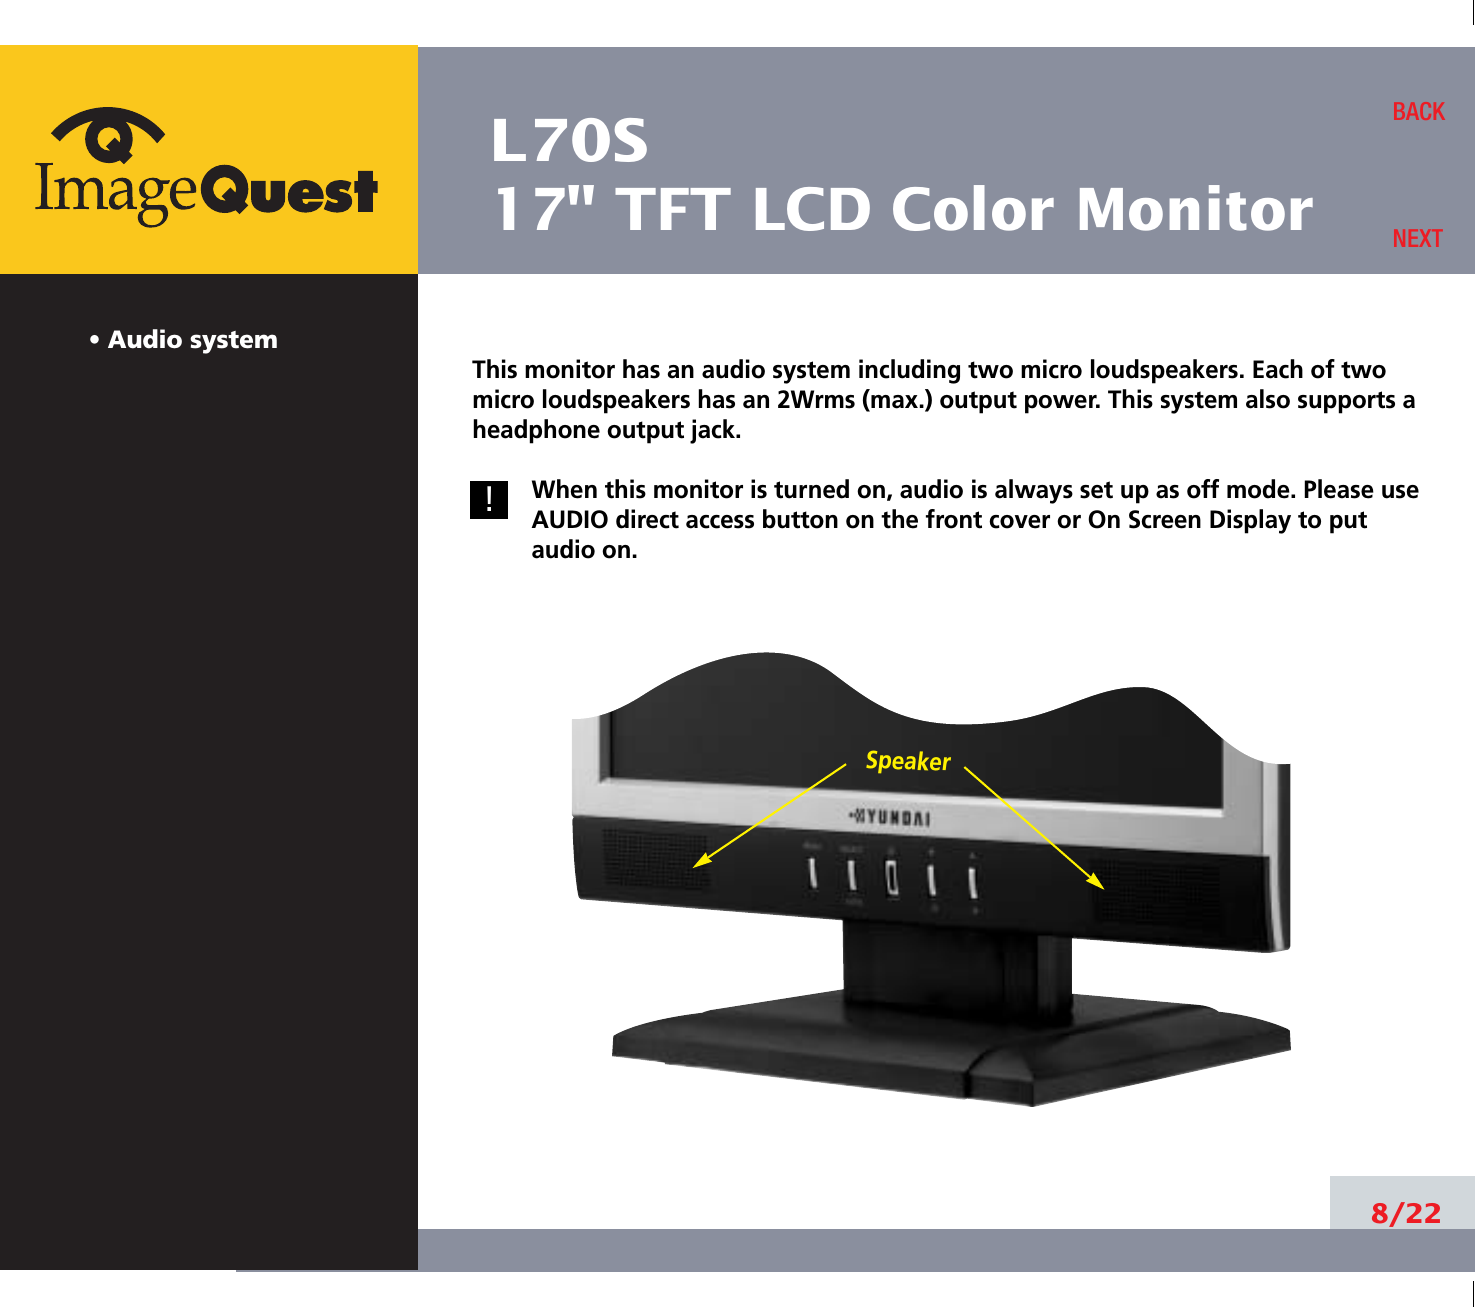 L70S17&quot; TFT LCD Color Monitor• Audio system8/22BACKNEXT!!This monitor has an audio system including two micro loudspeakers. Each of twomicro loudspeakers has an 2Wrms (max.) output power. This system also supports aheadphone output jack.When this monitor is turned on, audio is always set up as off mode. Please useAUDIO direct access button on the front cover or On Screen Display to putaudio on. Speaker